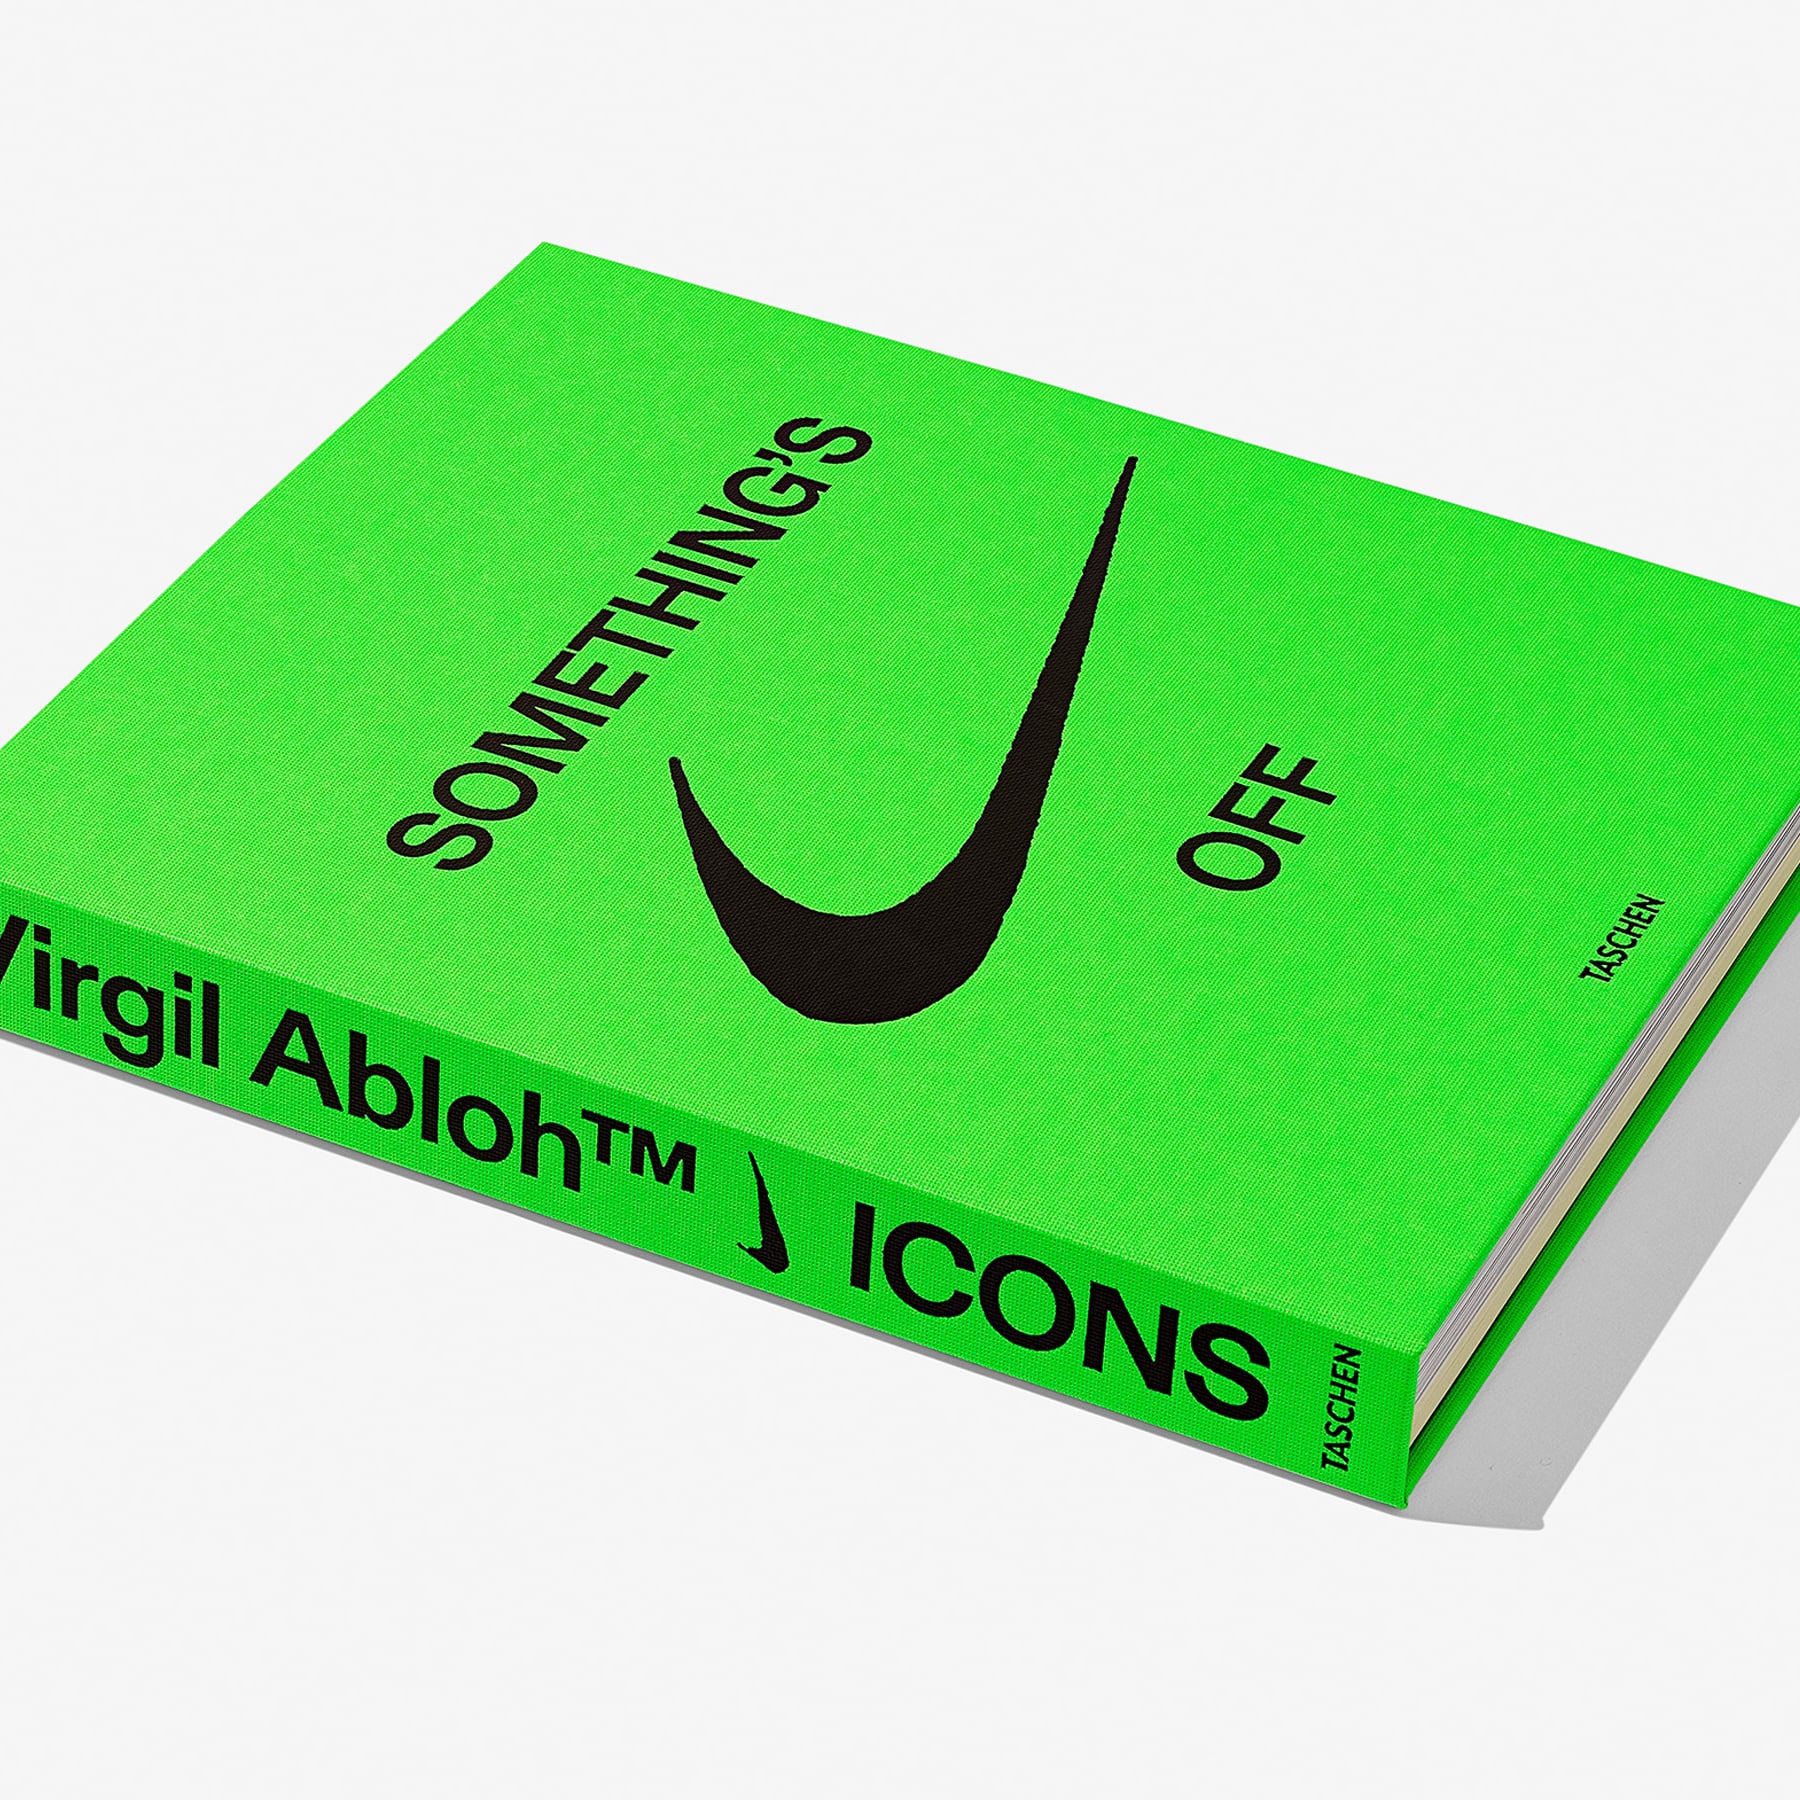 Nike: ICONS By Virgil Abloh Taschen Book | lupon.gov.ph